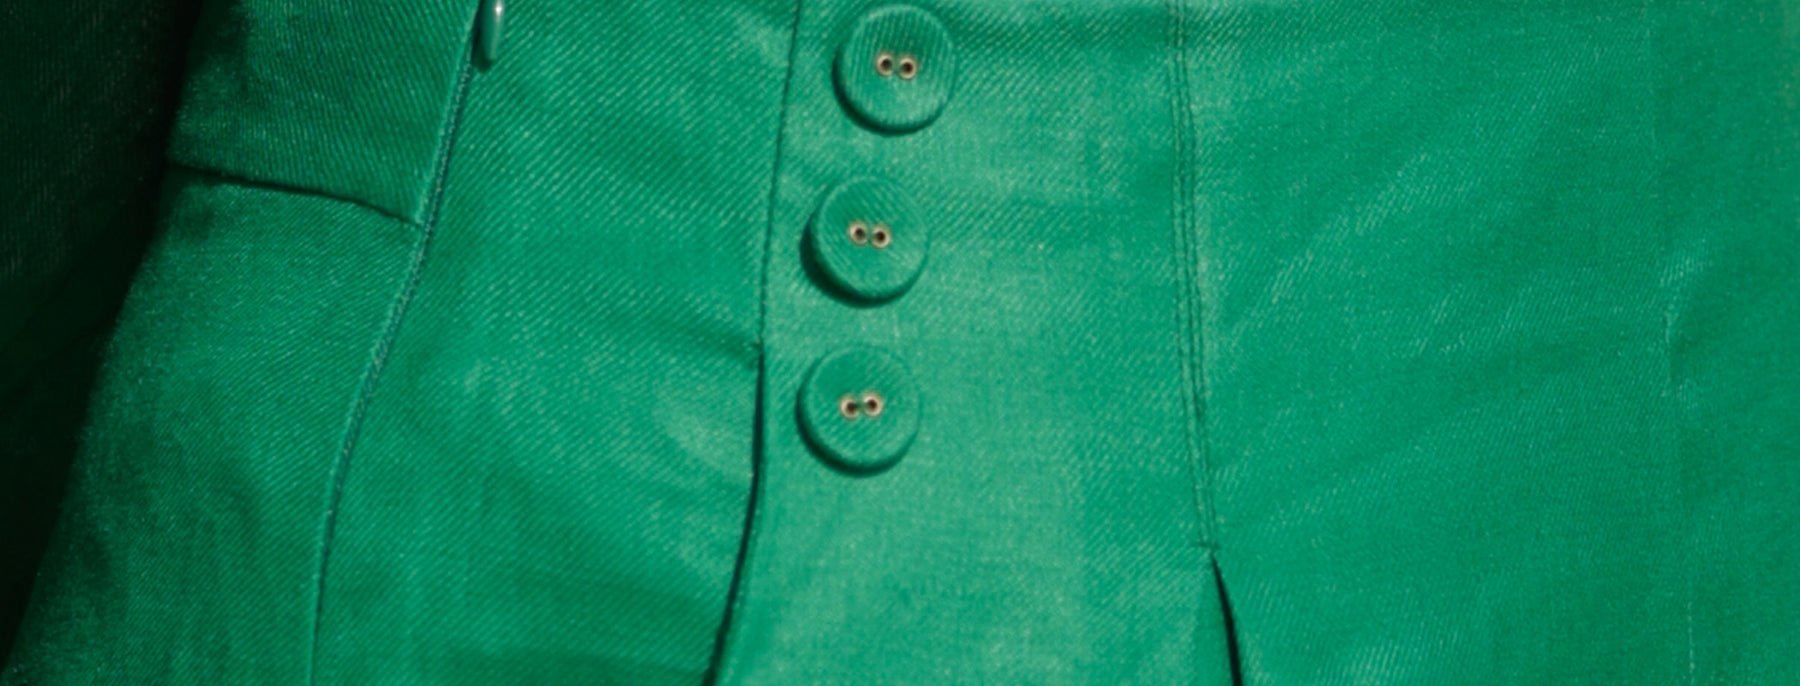 close up the sailor button details of high-waisted, emerald green tailored linen pants for women illustrating the hypoallergenic properties of linen clothing and why linen is good for sensitive skins. 